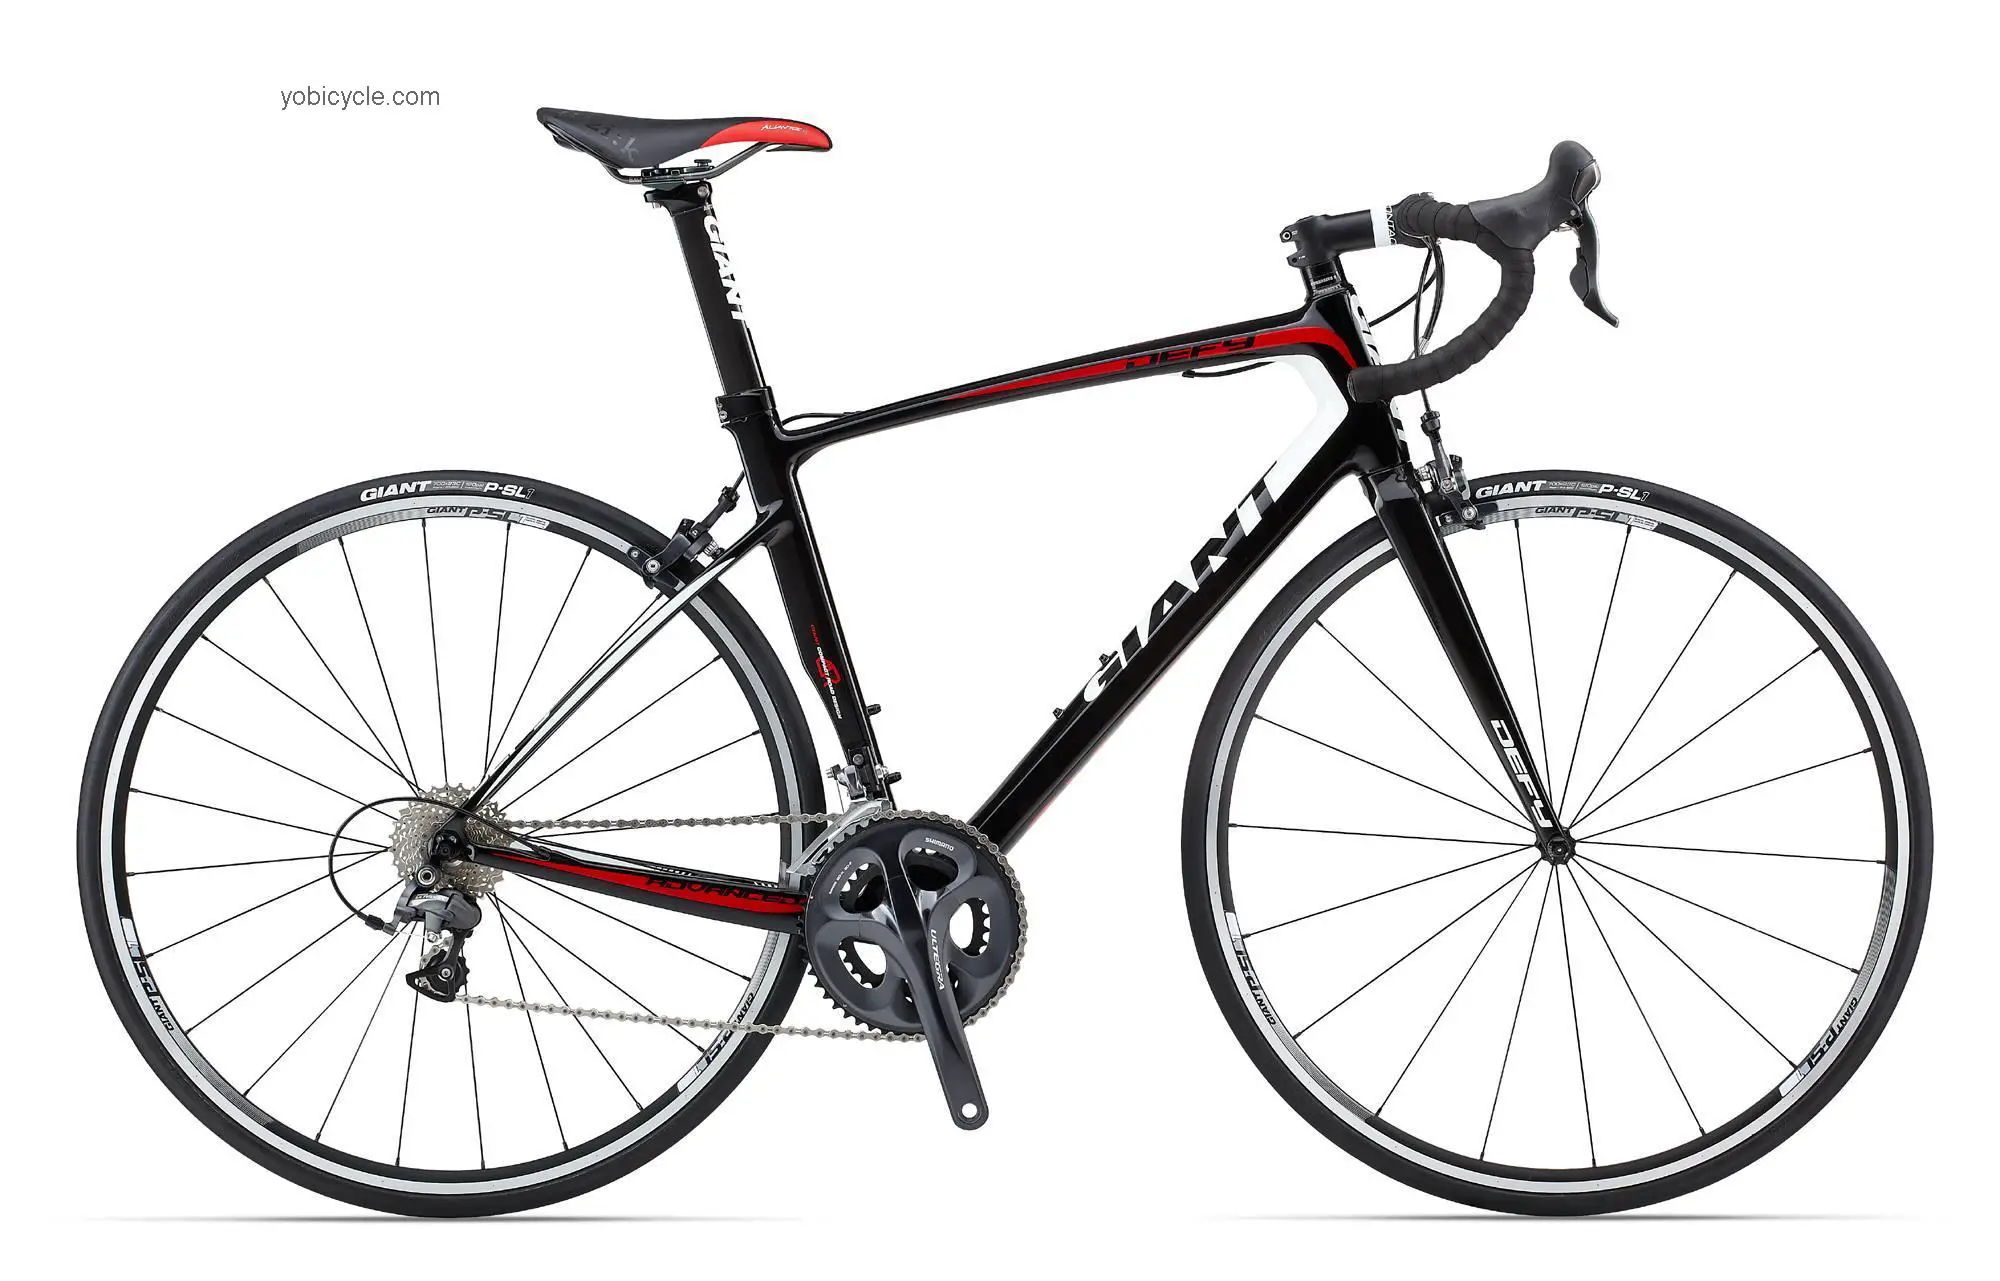 Giant Defy Advanced 1 2013 comparison online with competitors